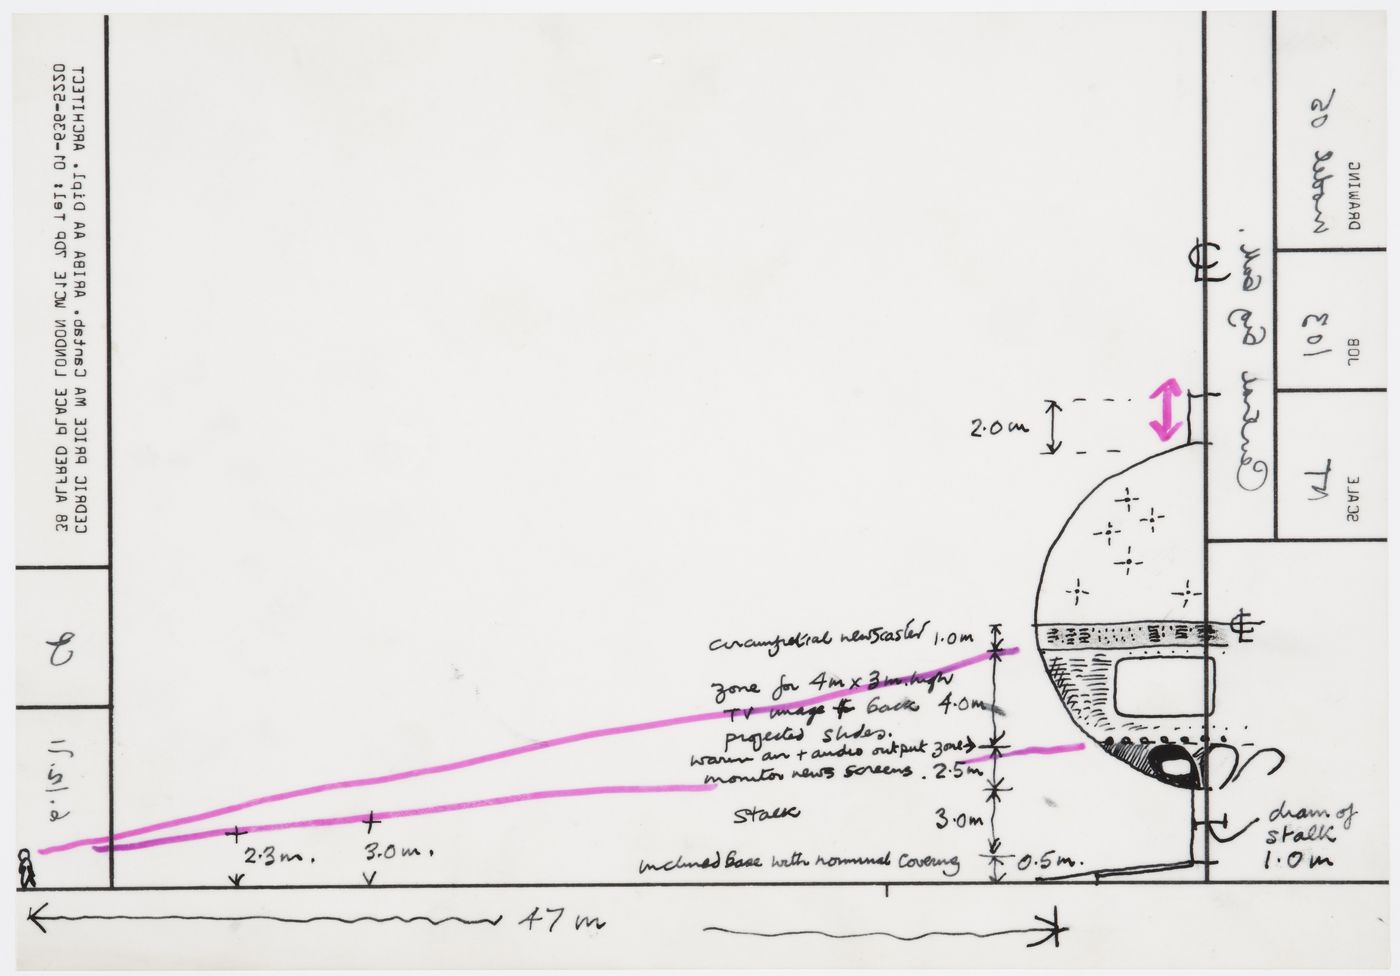 Olympia: "Central Big Ball," annotated elevation